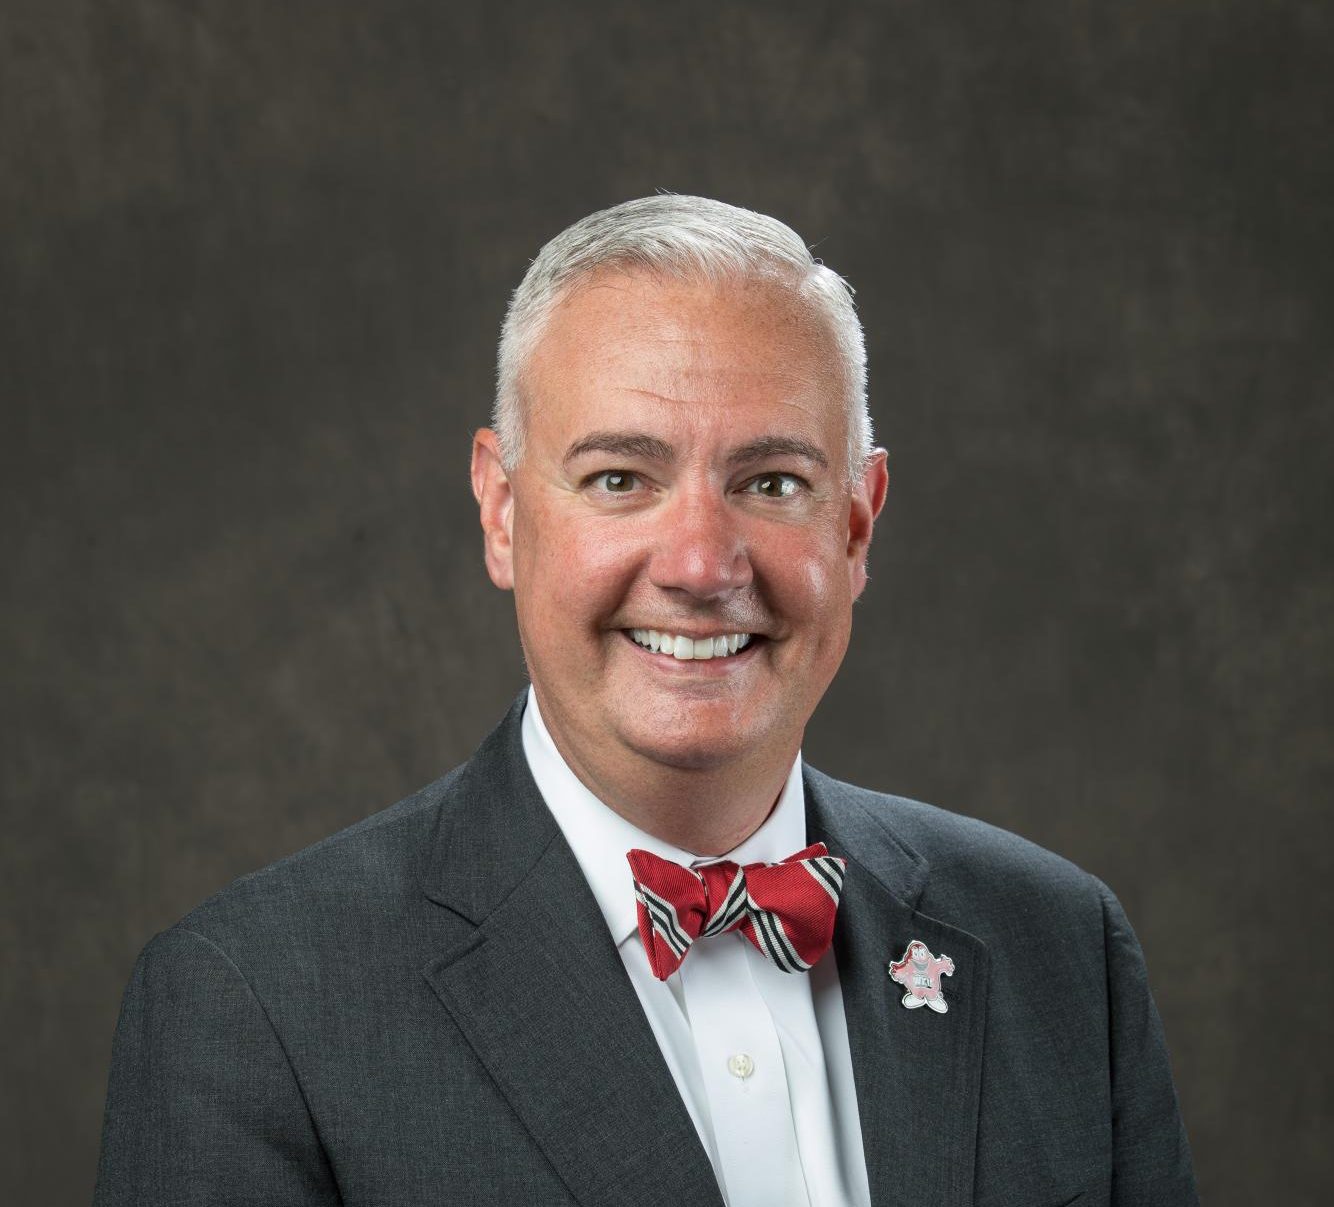 Timothy Caboni is the president of WKU and makes $468,180 a year, which is $240.09 an hour. 